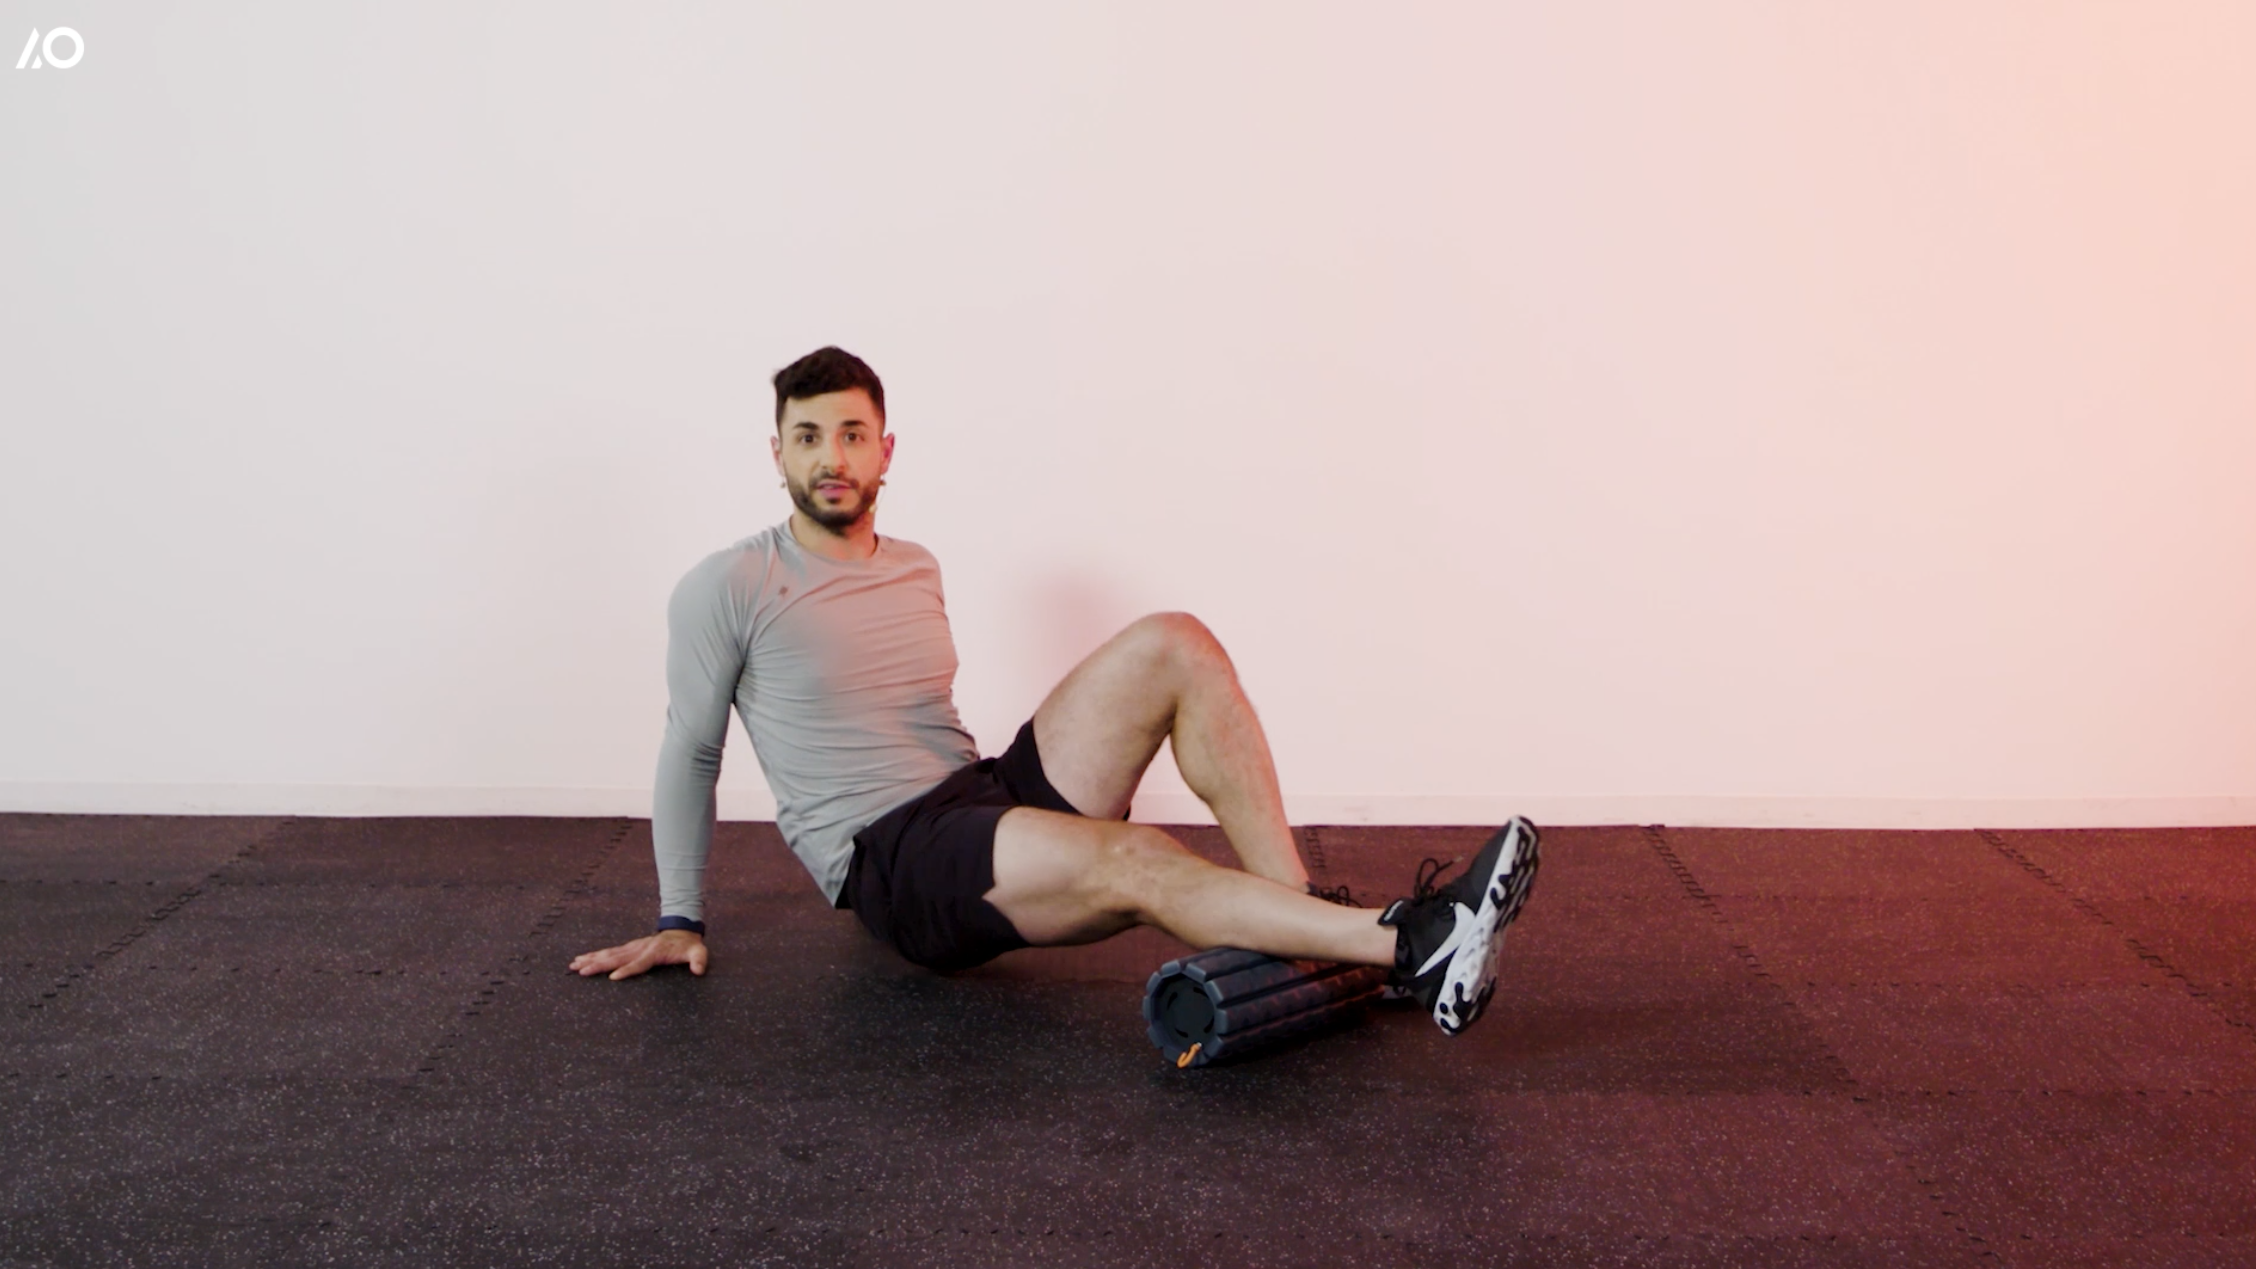 Dan Giordano Demonstrates How to Use Foam Roll the Right Way